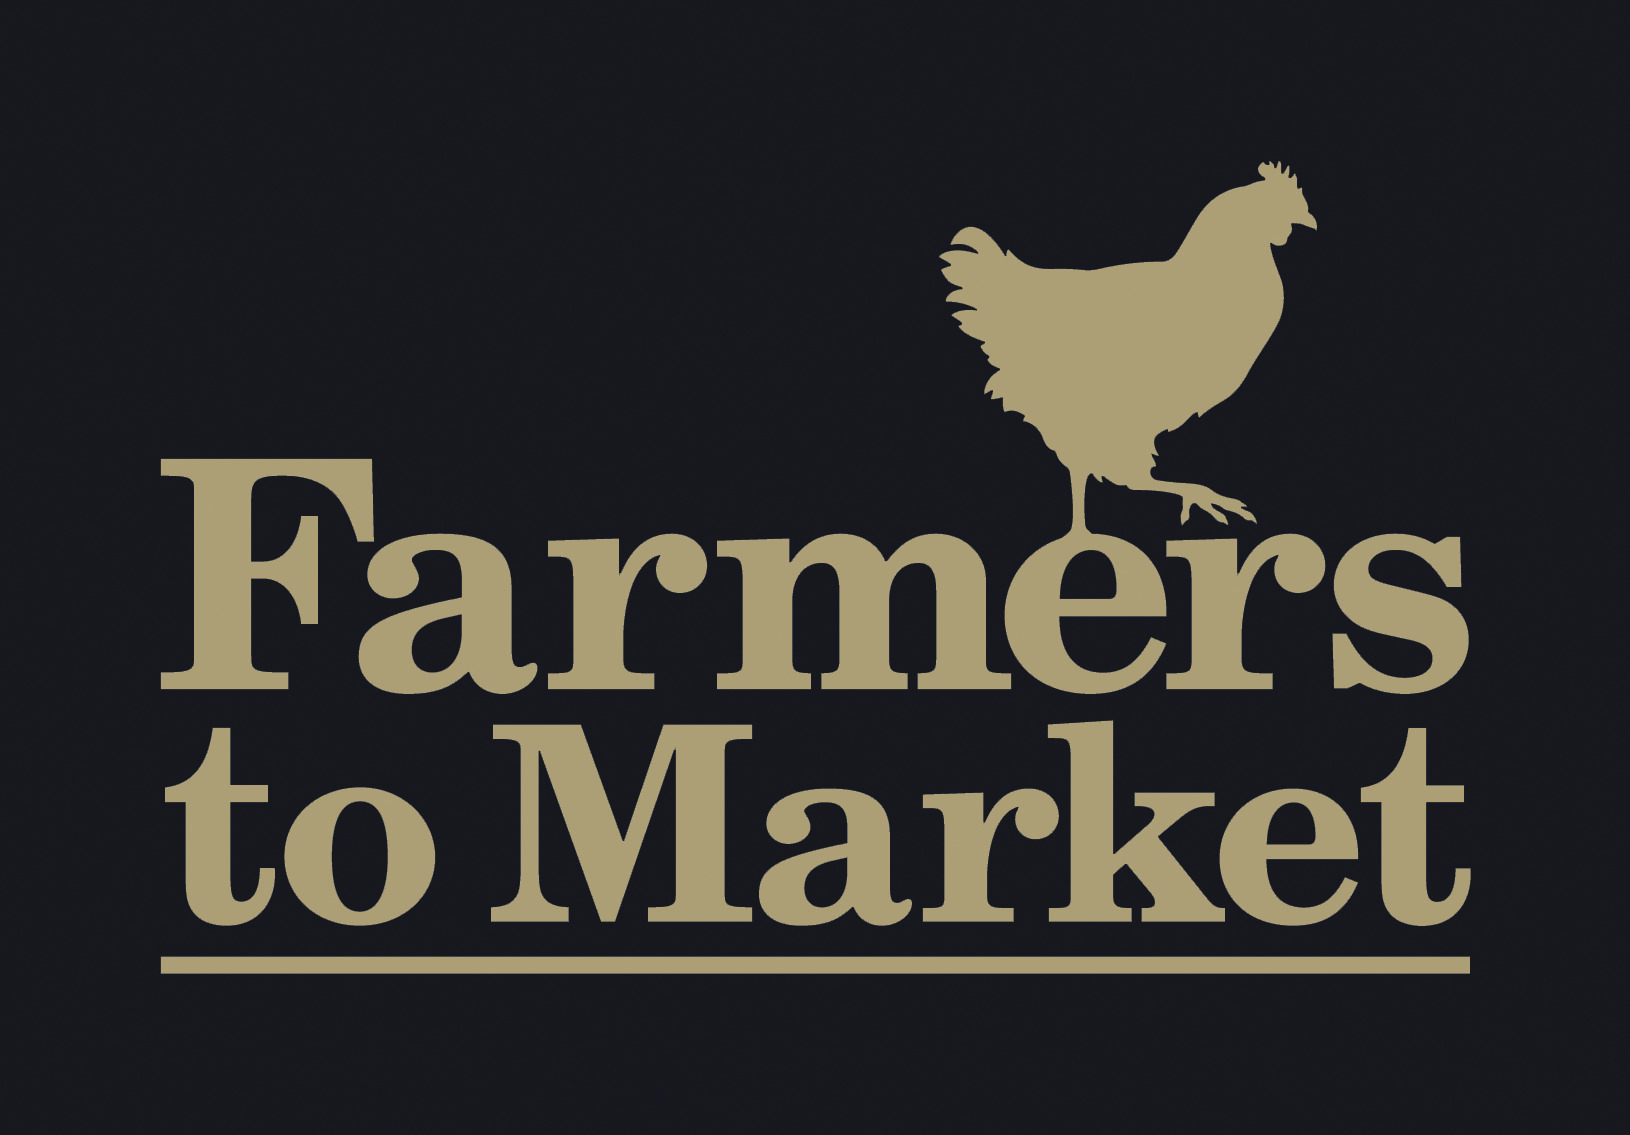 Image of Farmers to Market logotype